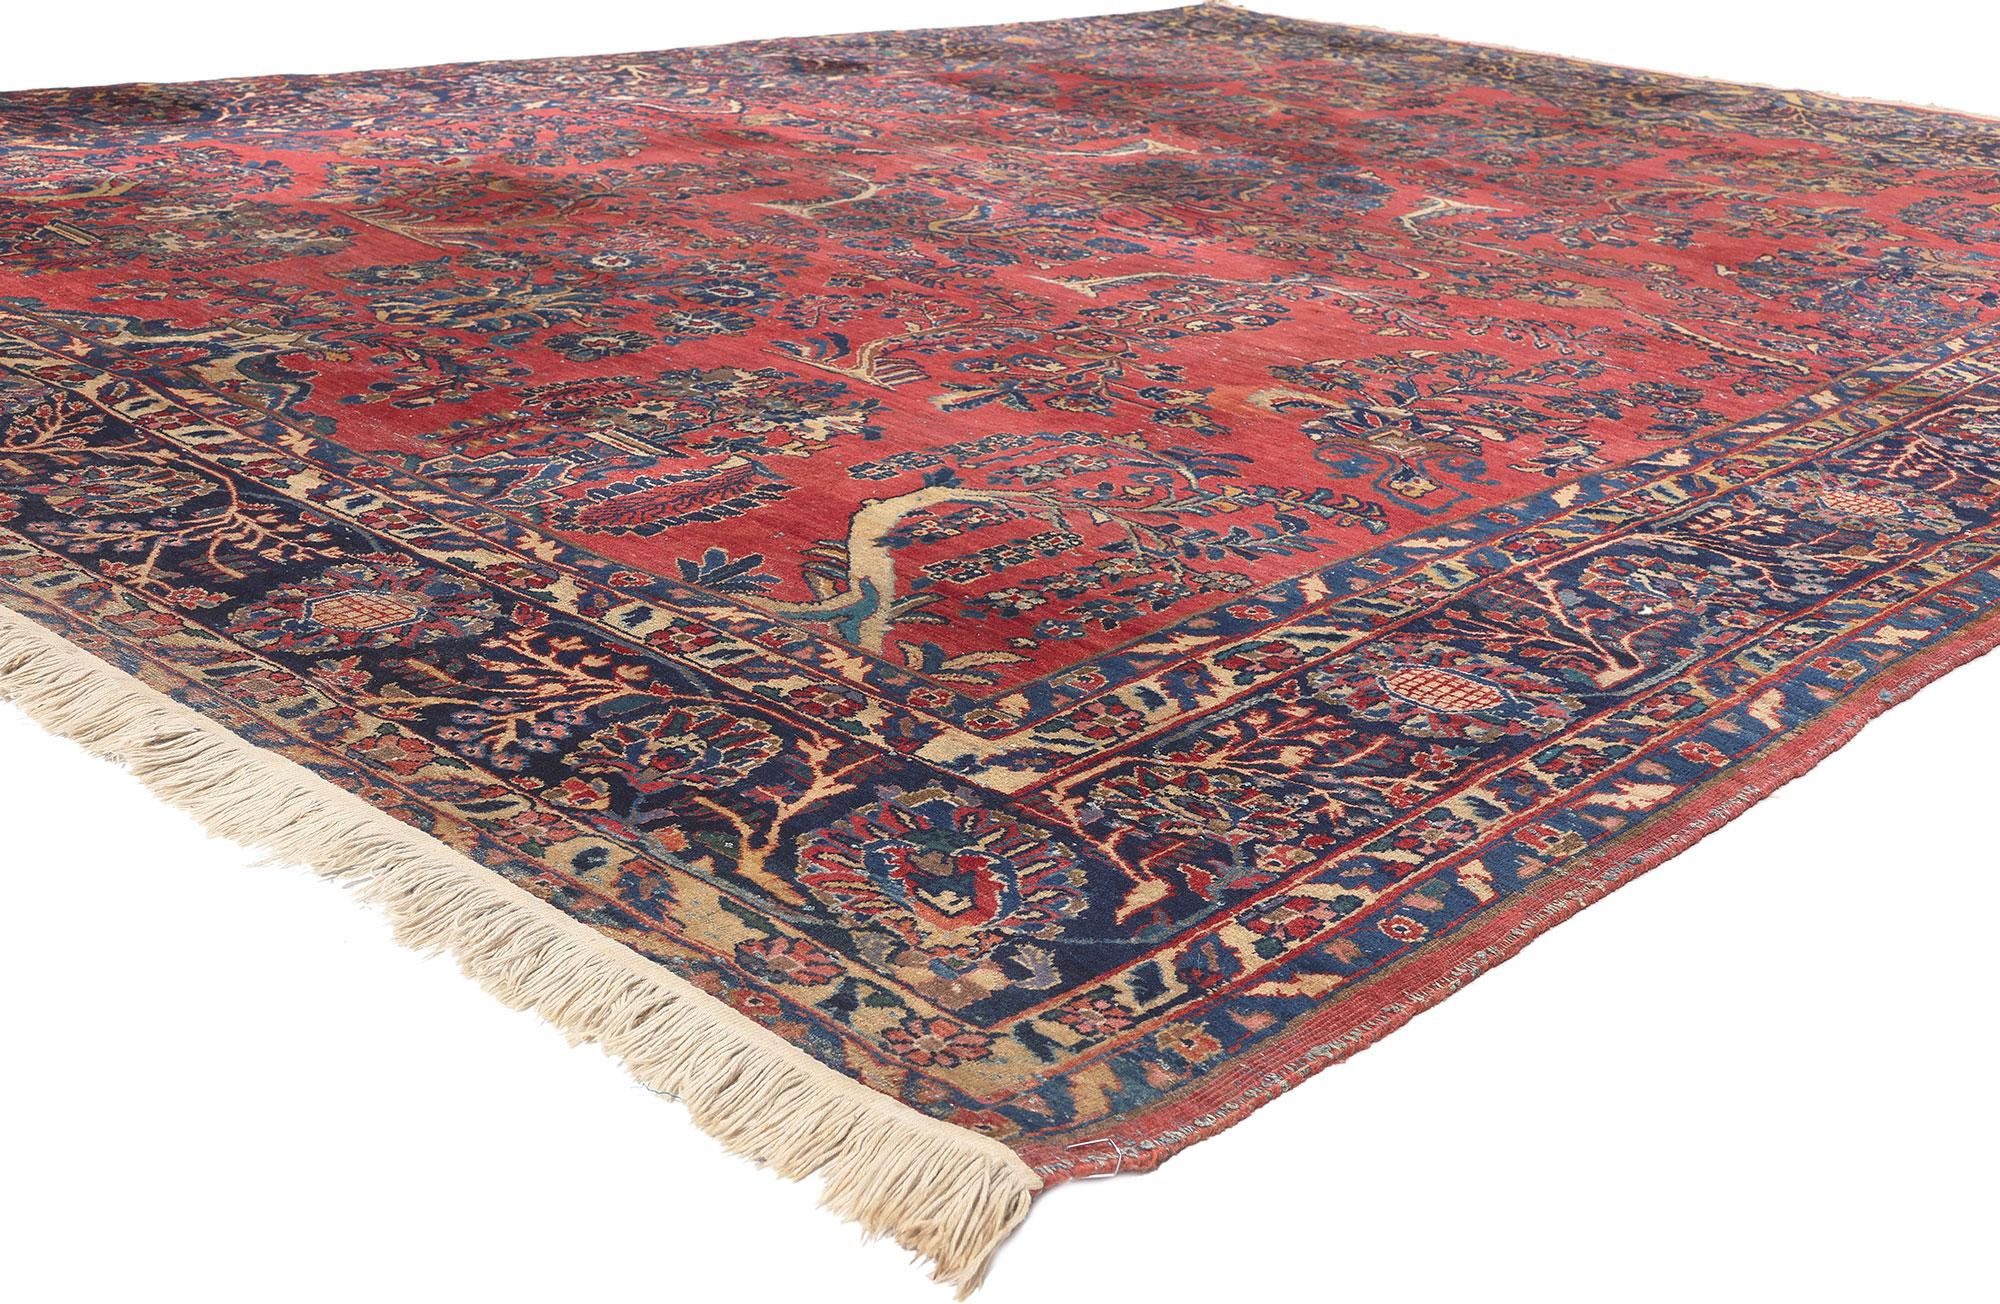 78544 Antique Persian Sarouk Rug, 08'11 x 11'06.
Emulate traditional sensibility with regal charm, this hand knotted antique Persian Sarouk rug is a captivating vision of woven beauty. The intricate floral design and rich color palette woven into